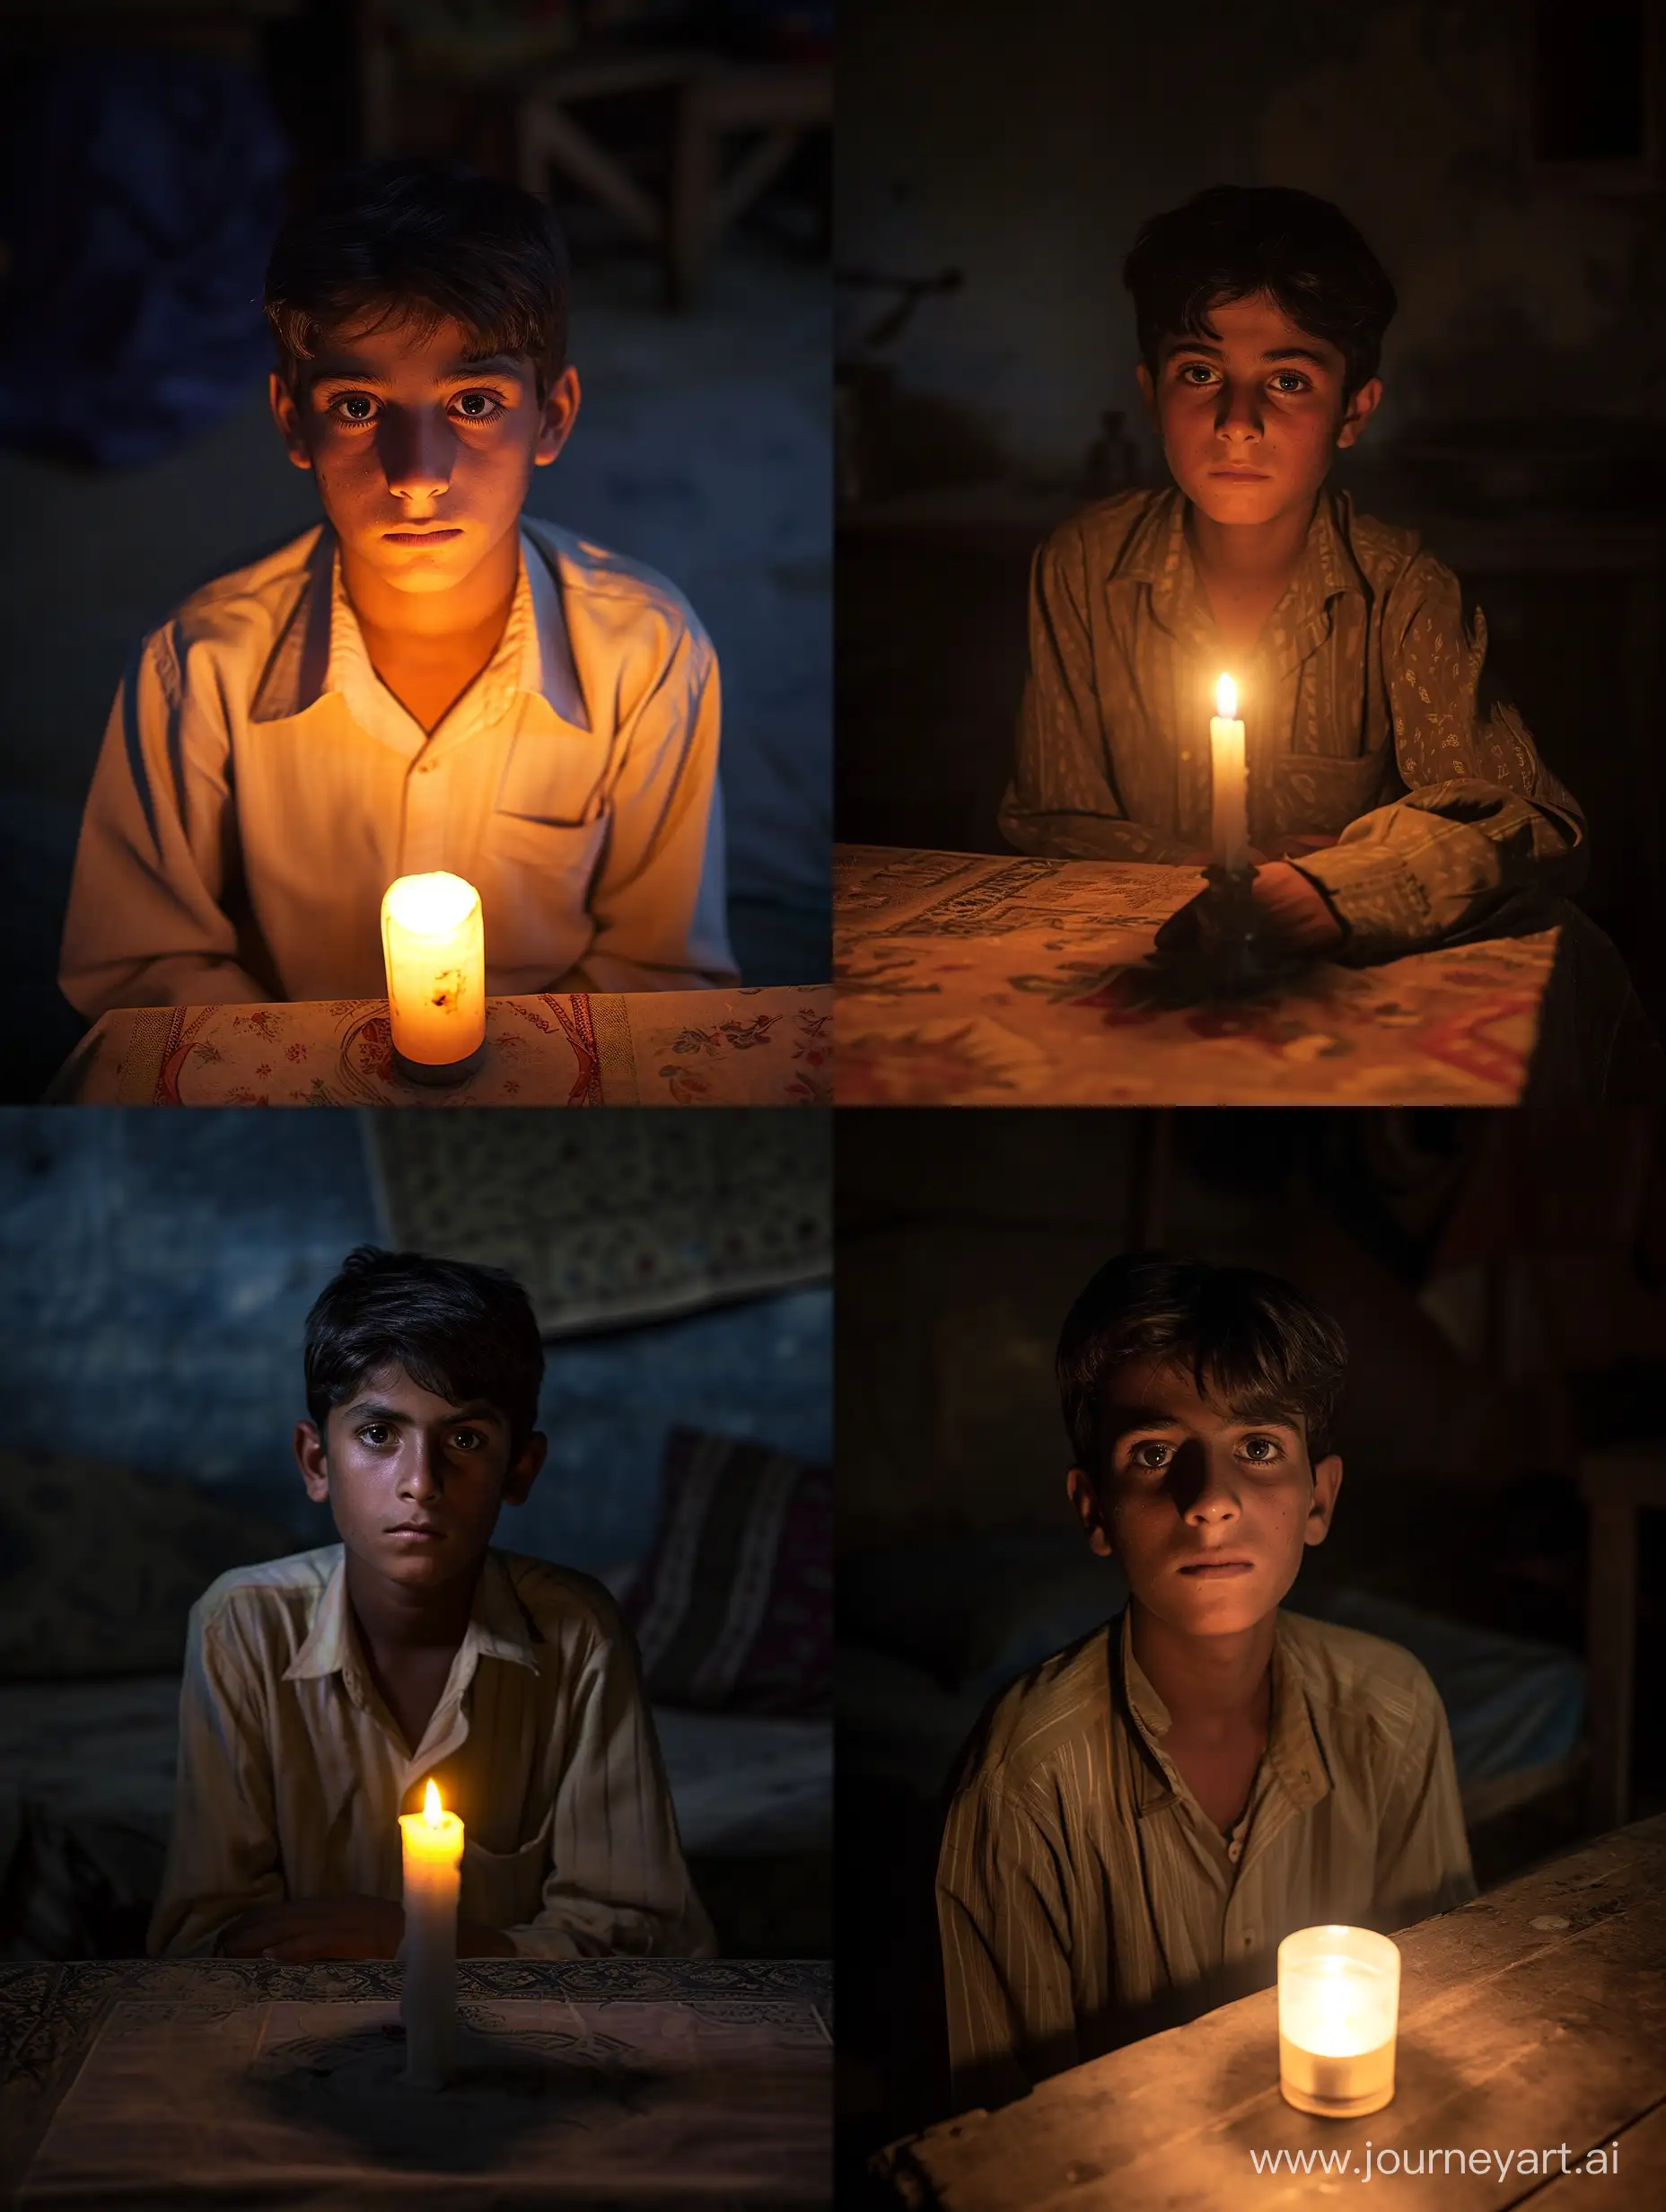 A handsome 19-year-old Pakistani boy sits in front of a table illuminated by the soft glow of a single candle.